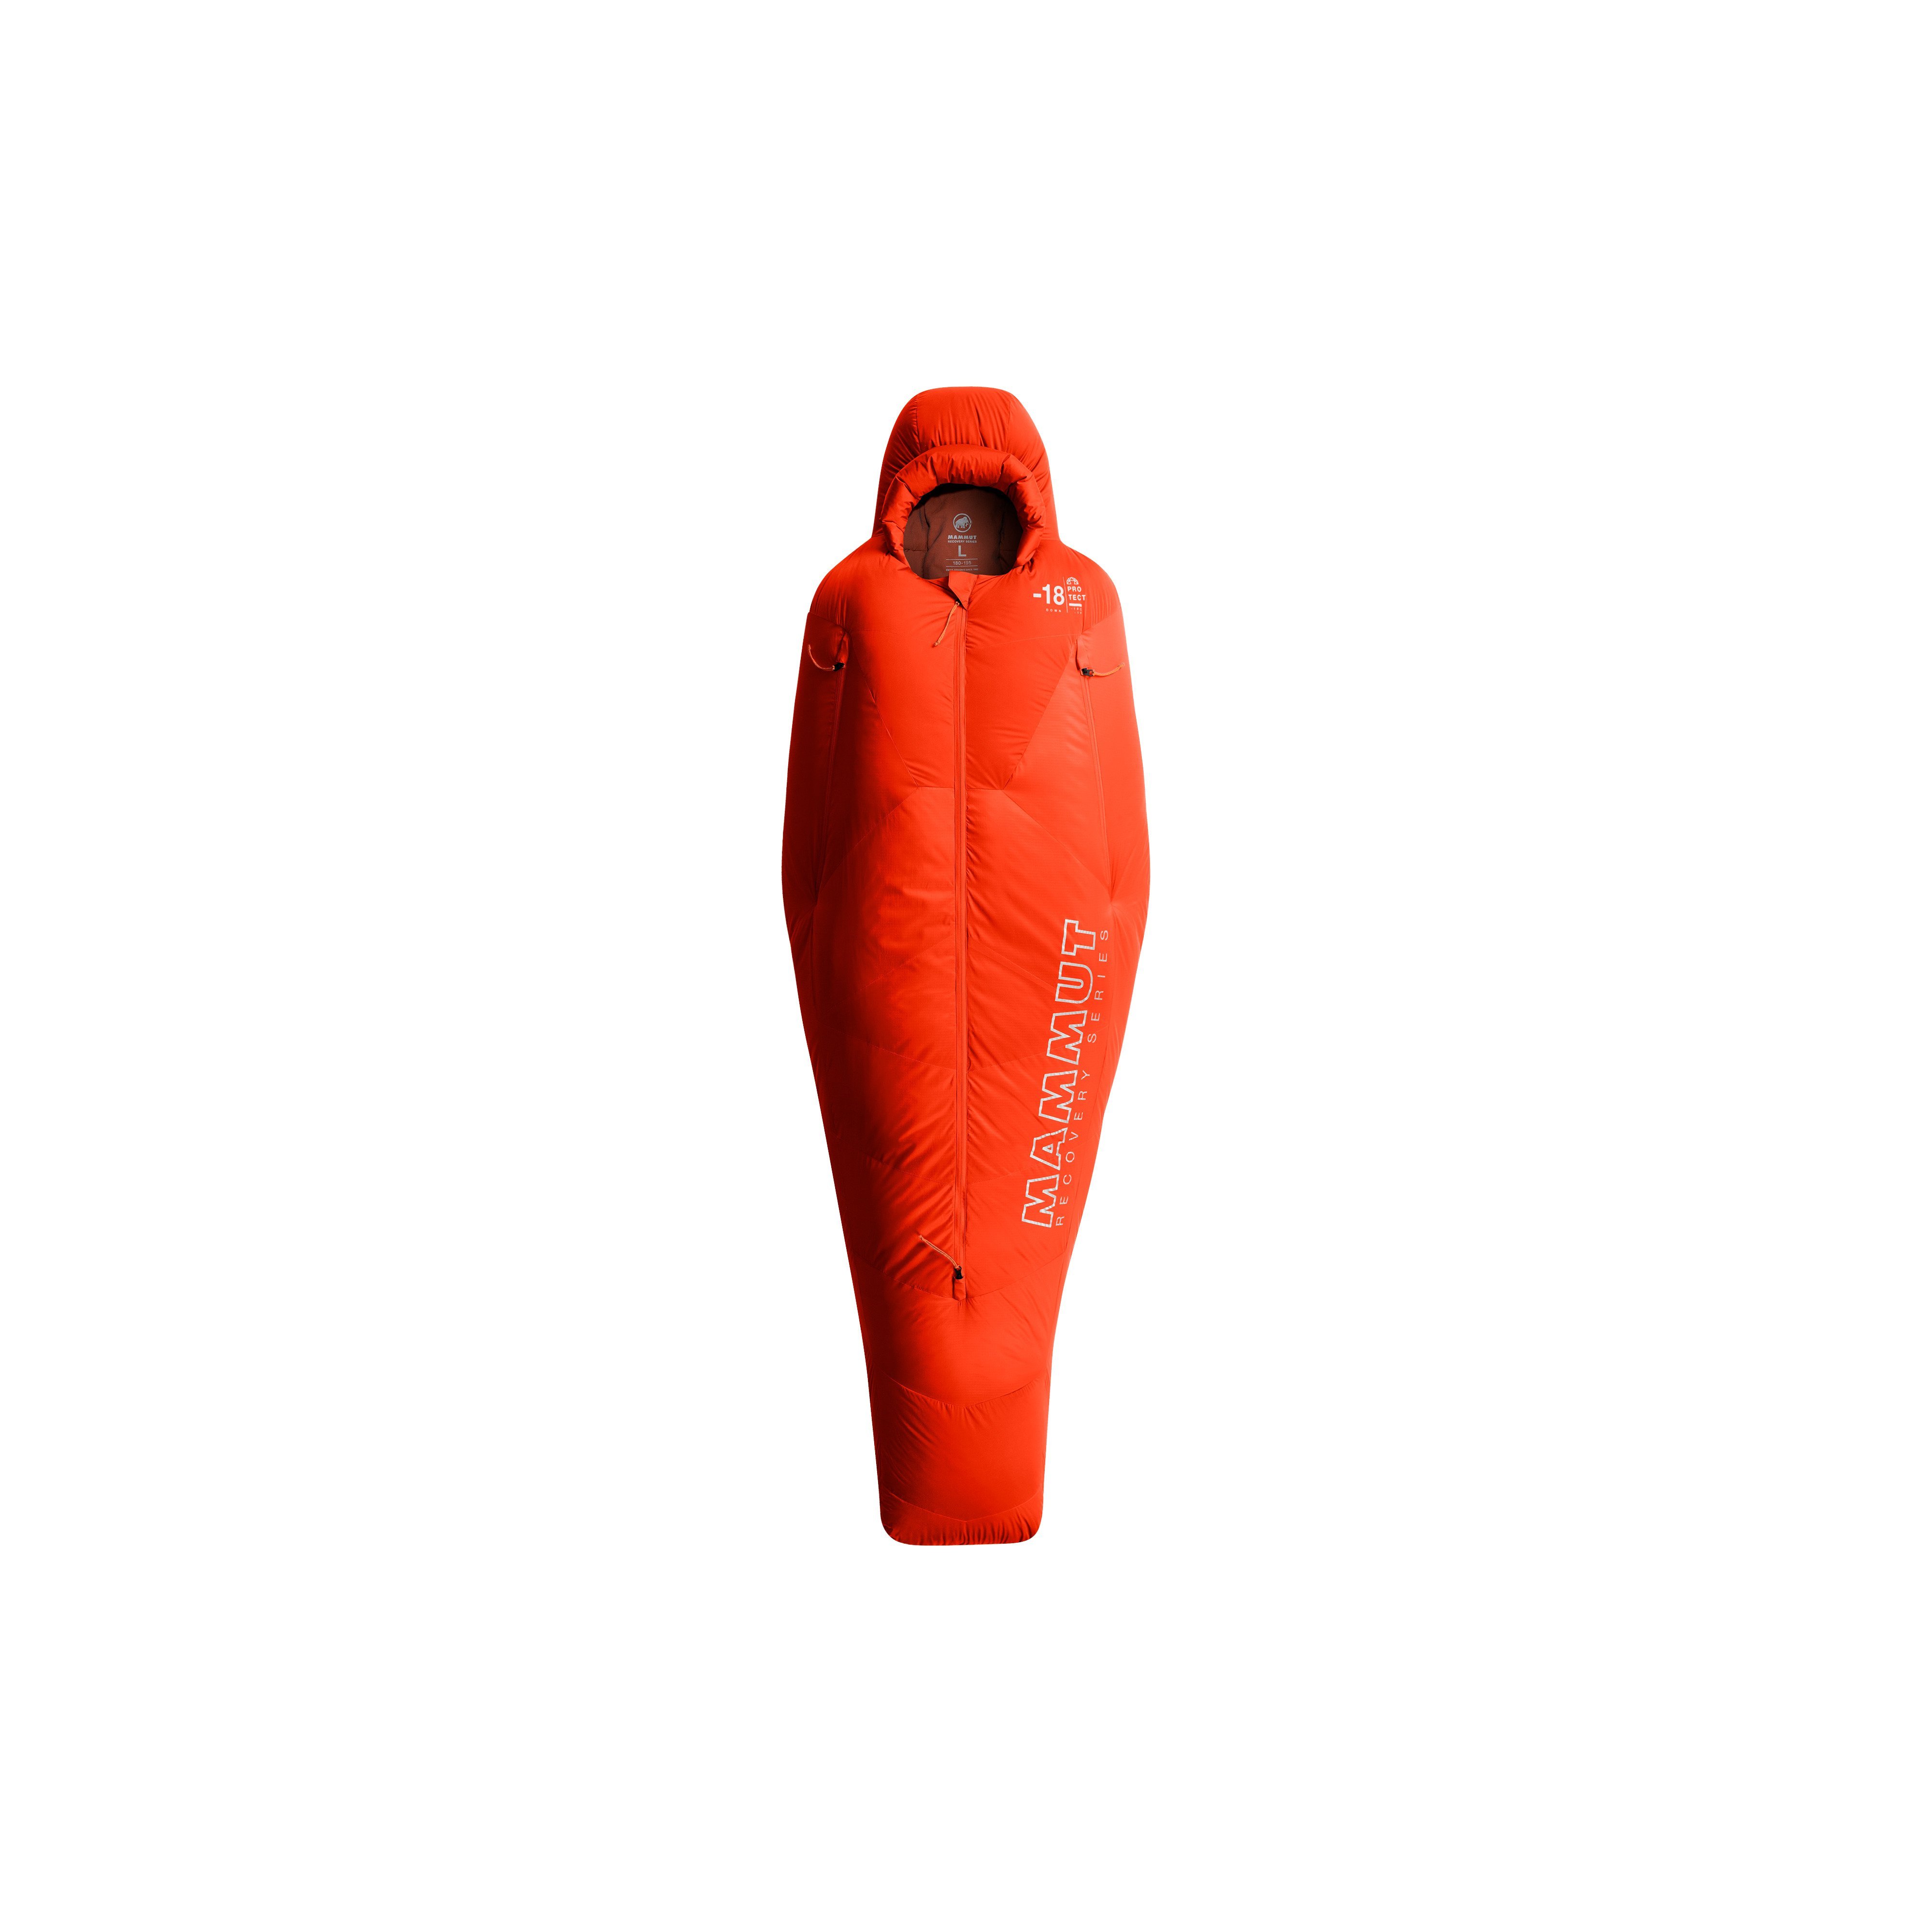 Protect Down Bag -18C - safety orange, L product image